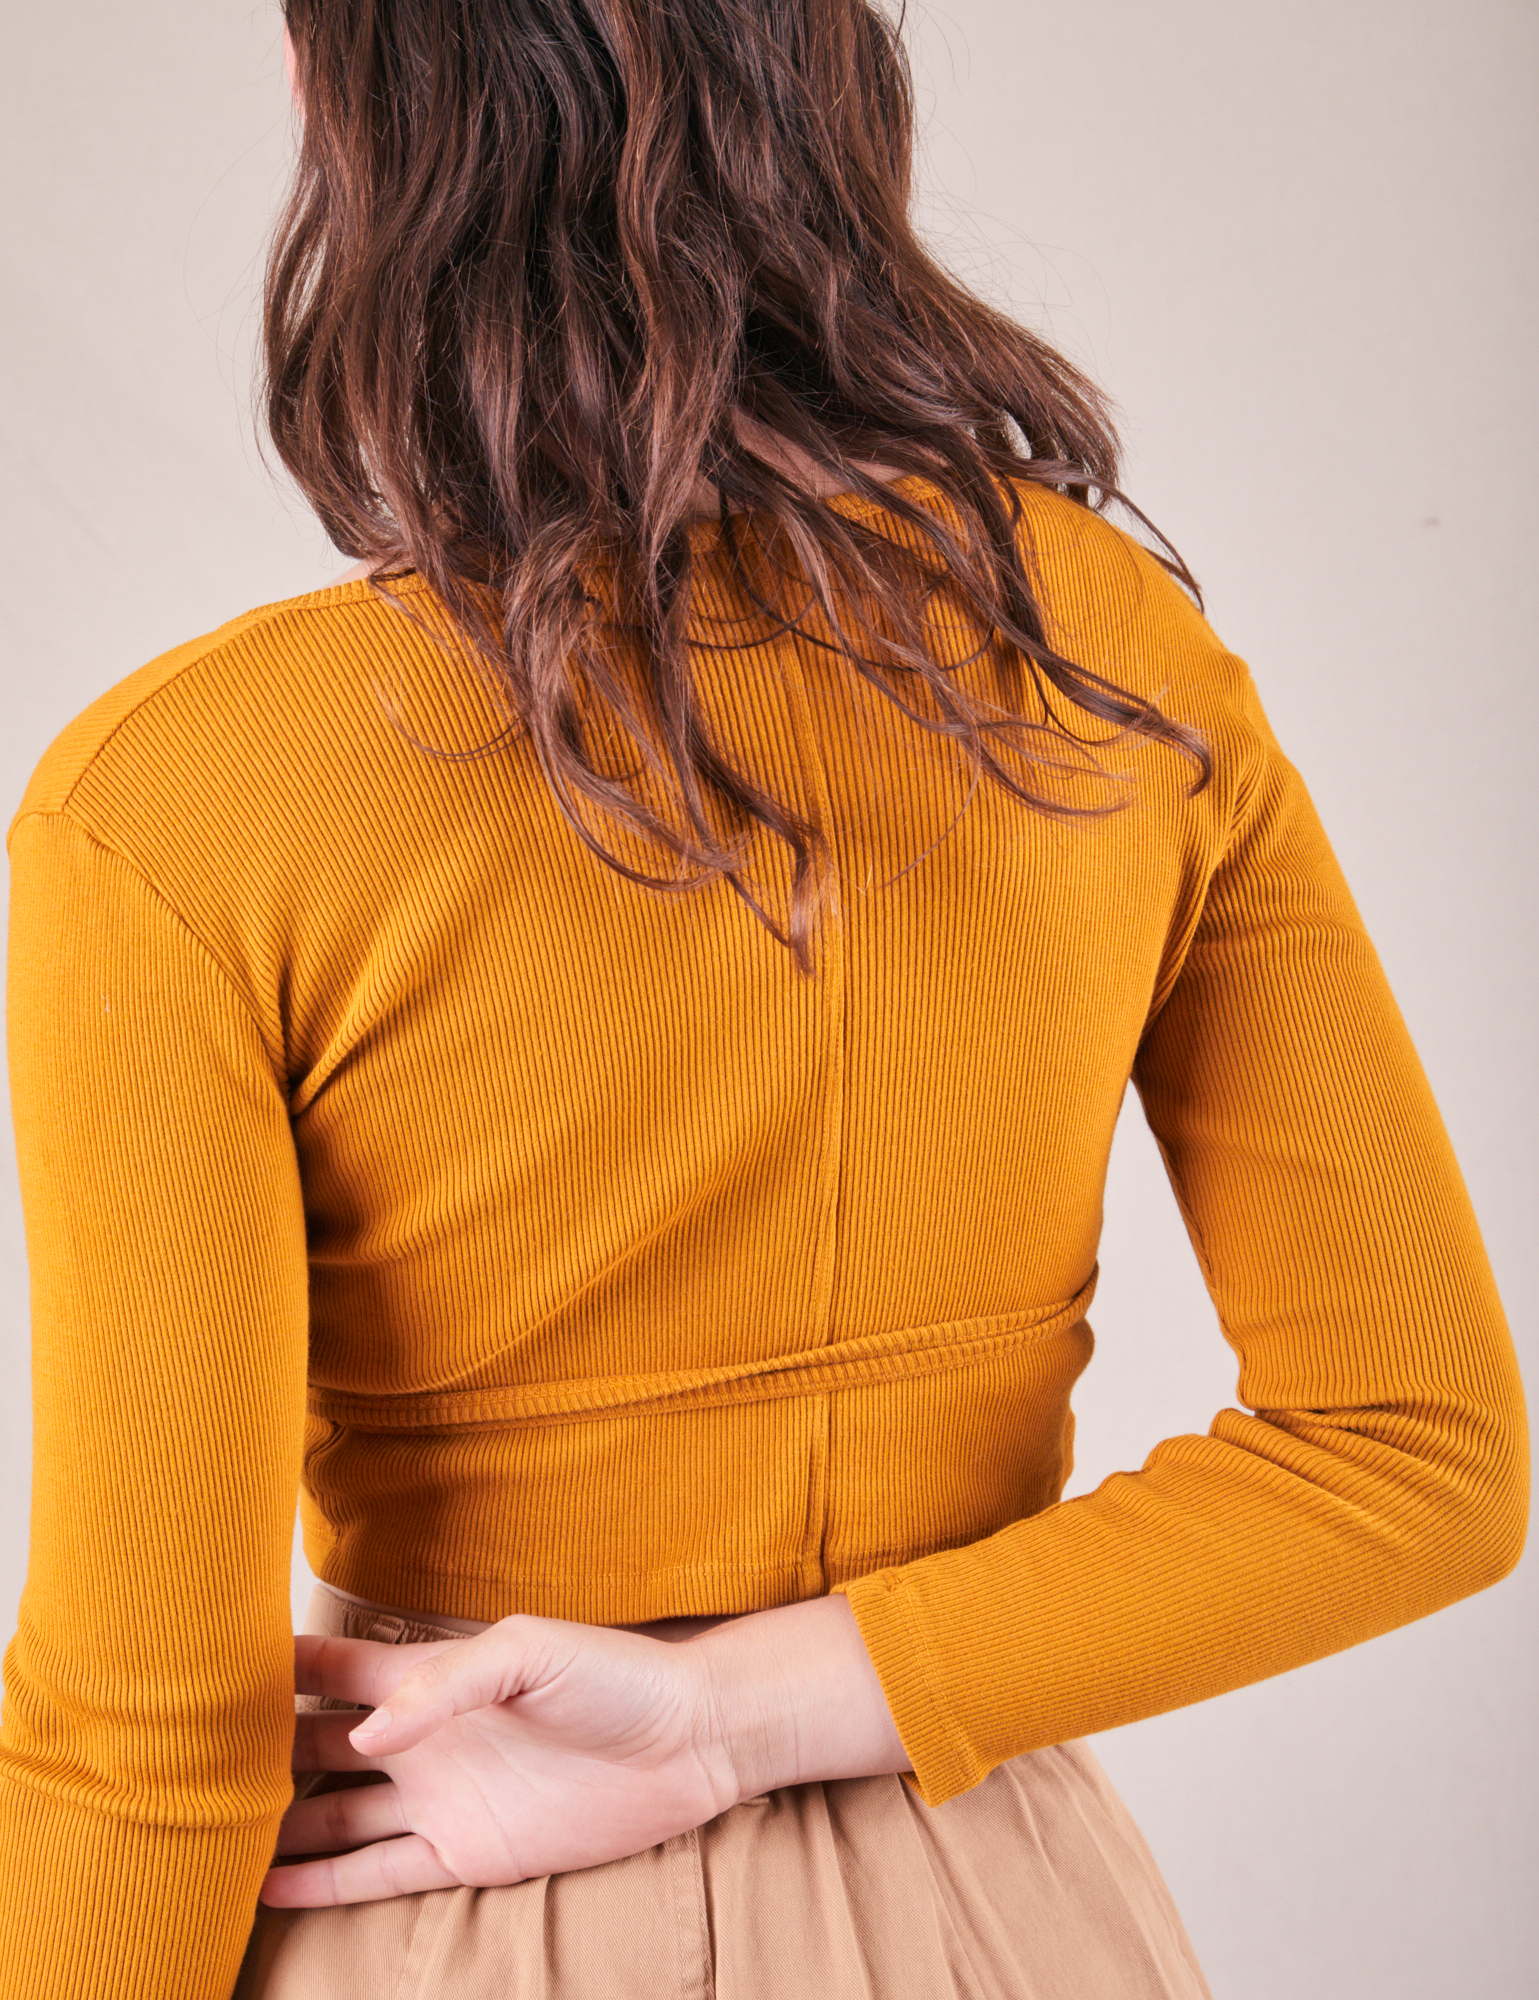 Wrap Top in Spicy Mustard back view on Alex